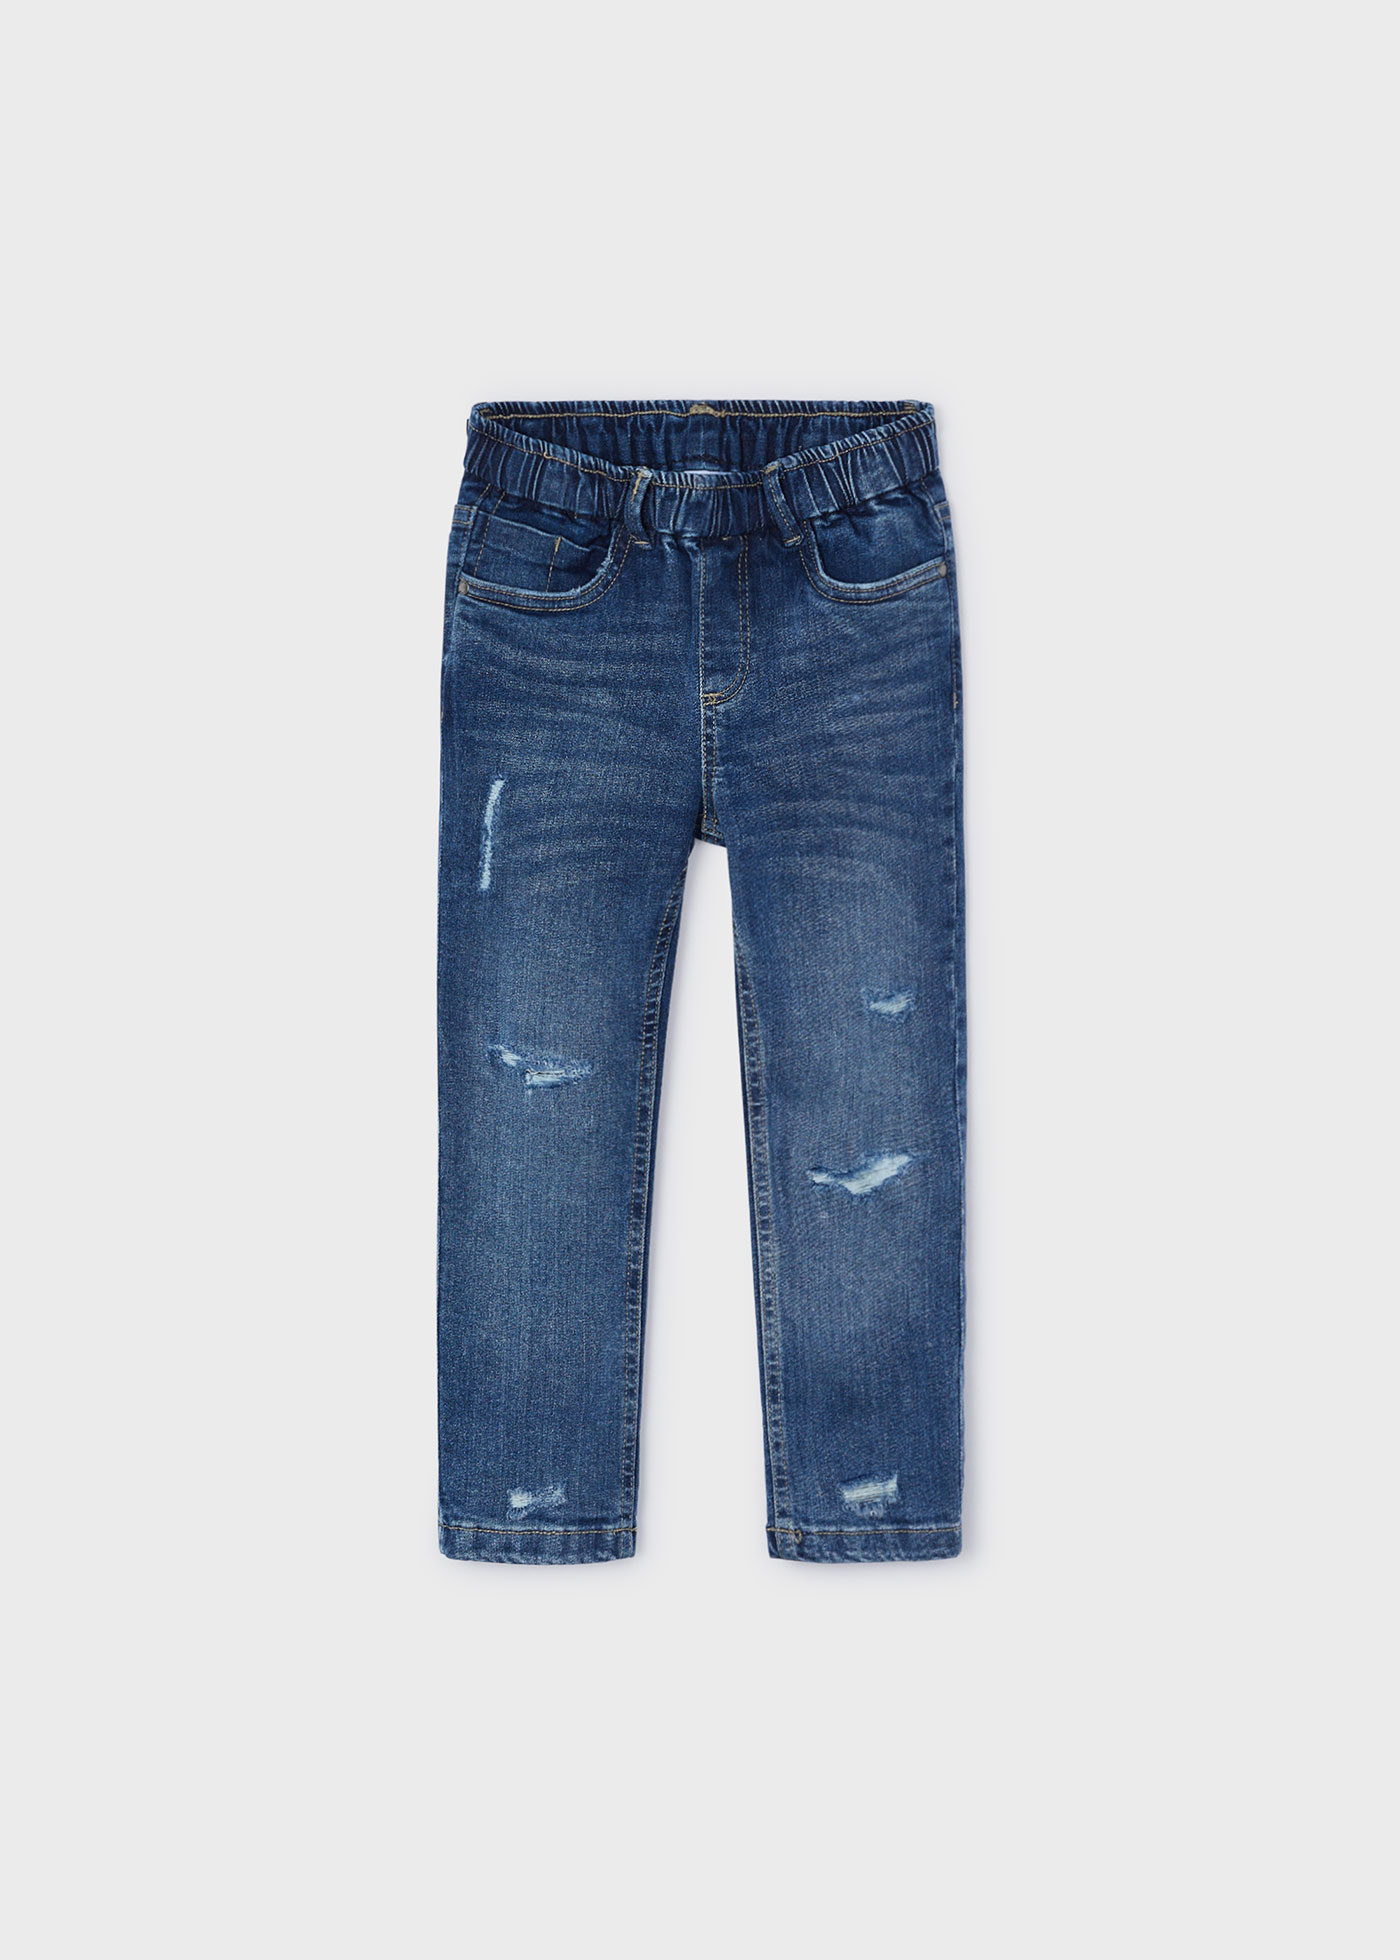 Distressed jeans for boys